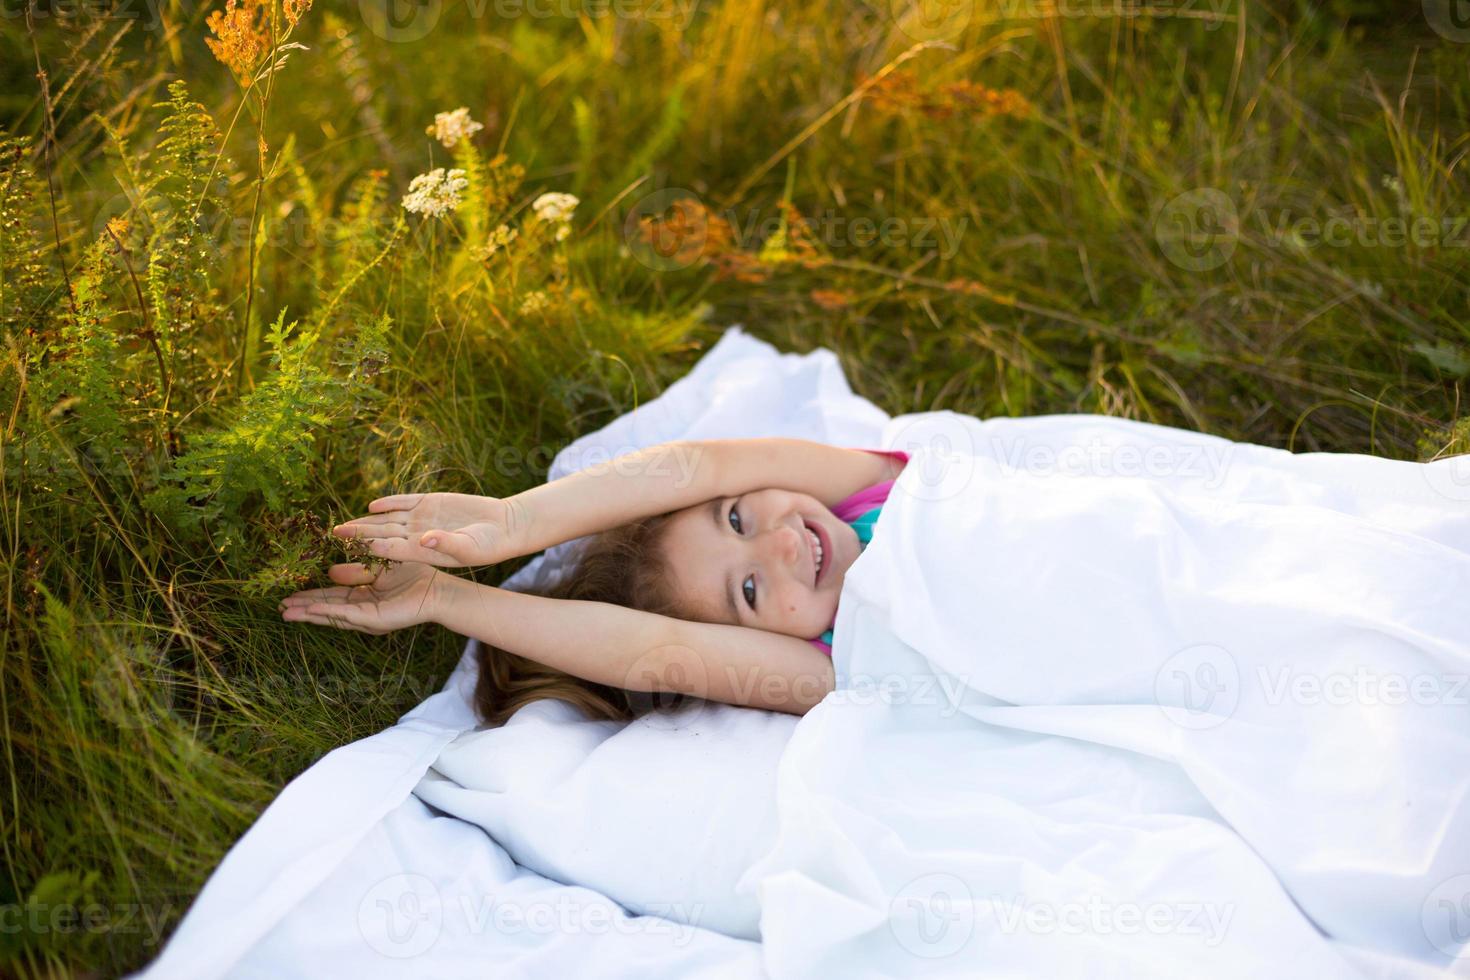 Girl sleeps on bed in grass, Sweet stretches and yawns sleepily, good morning in fresh air. Eco-friendly, healthy sleep, Protection from mosquitoes, clean nature, ecology, children's health photo